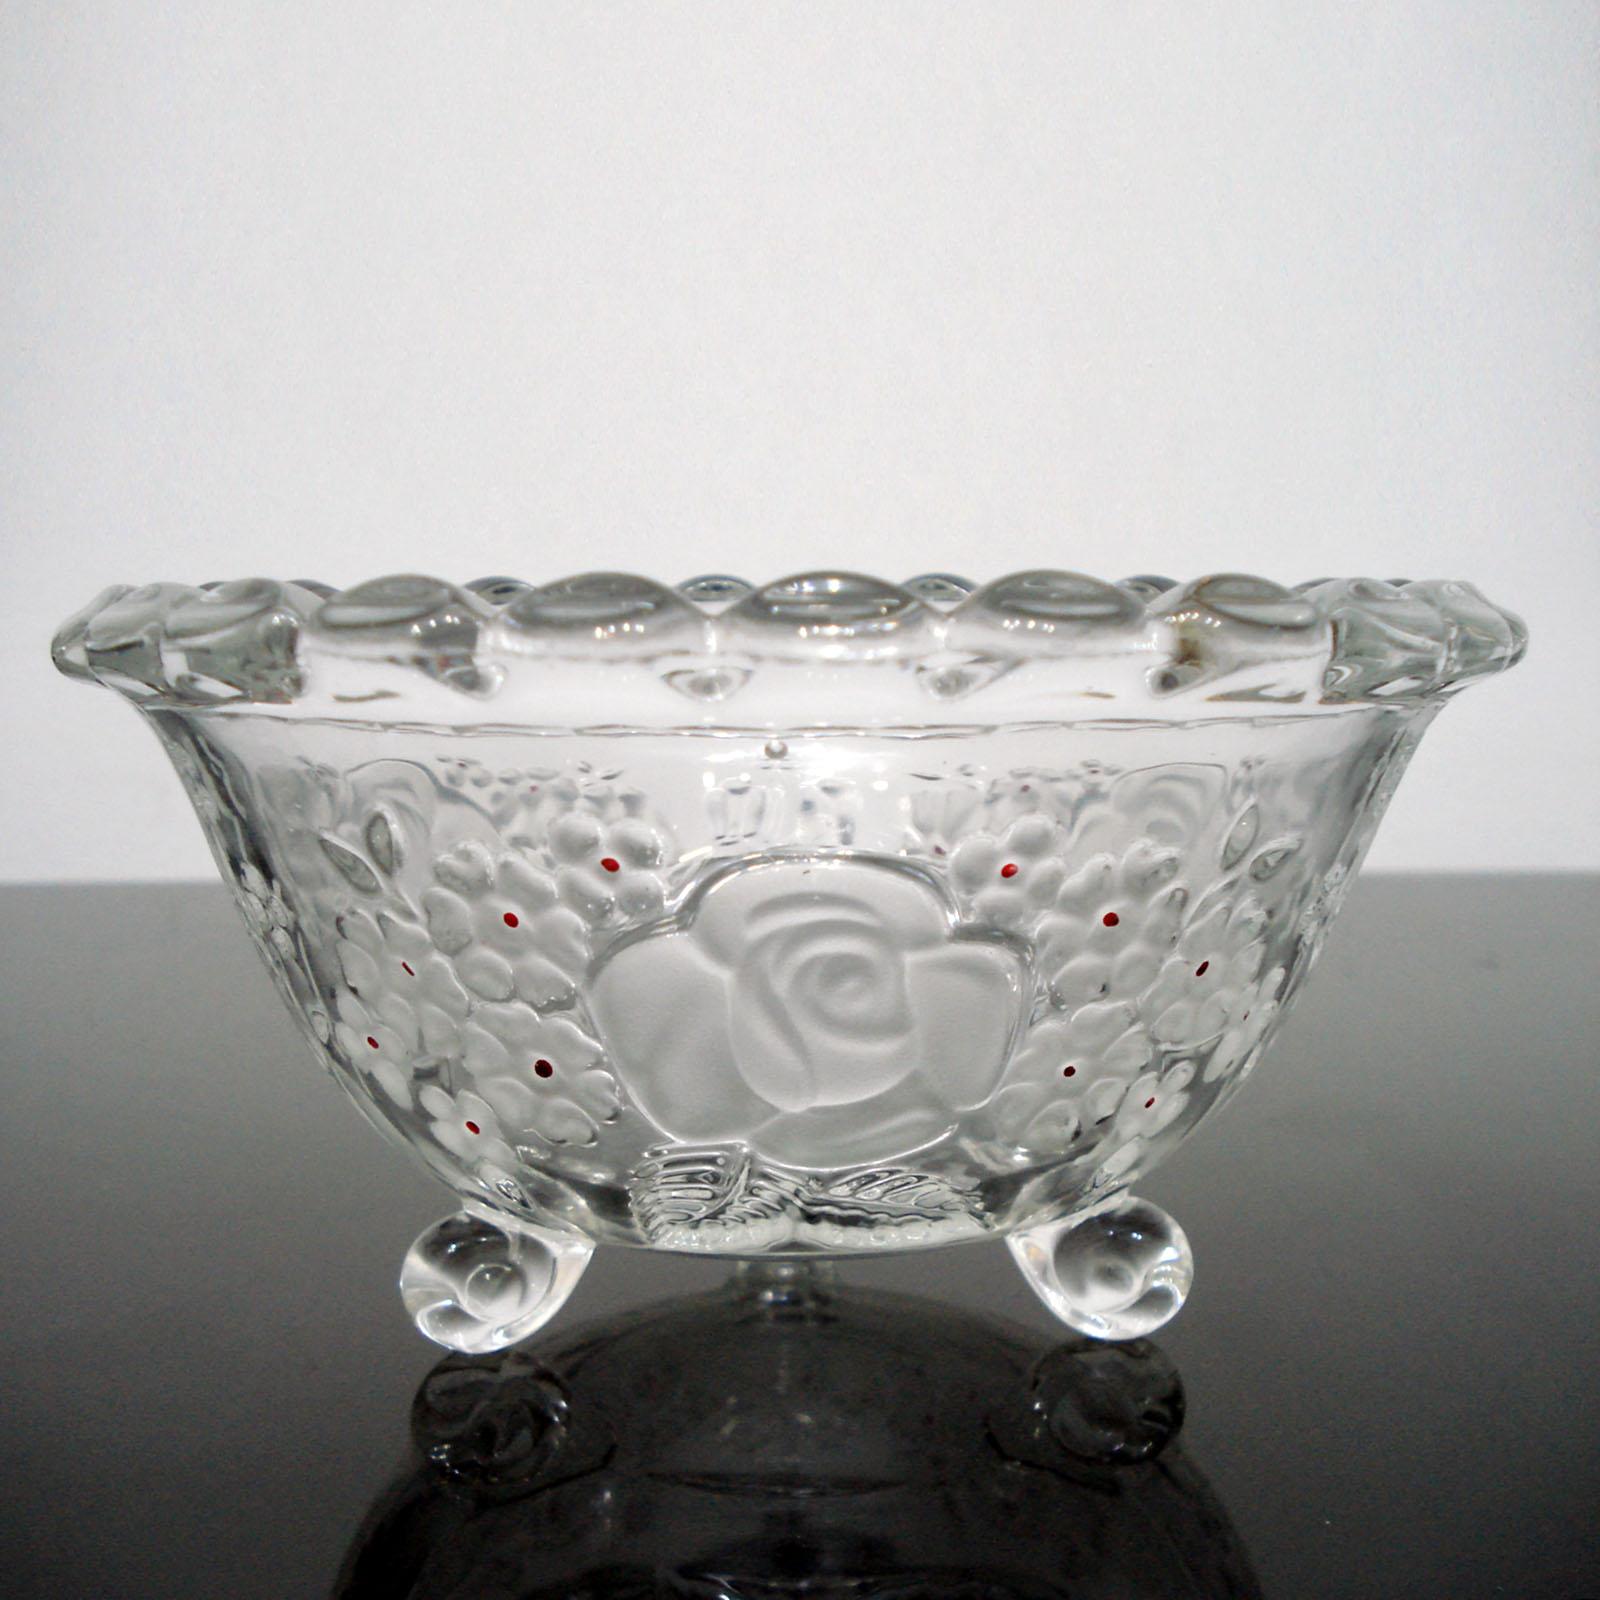 European Fabulous Mid-Century Glass Bowl Floral Décor with Red Enamel Accents For Sale